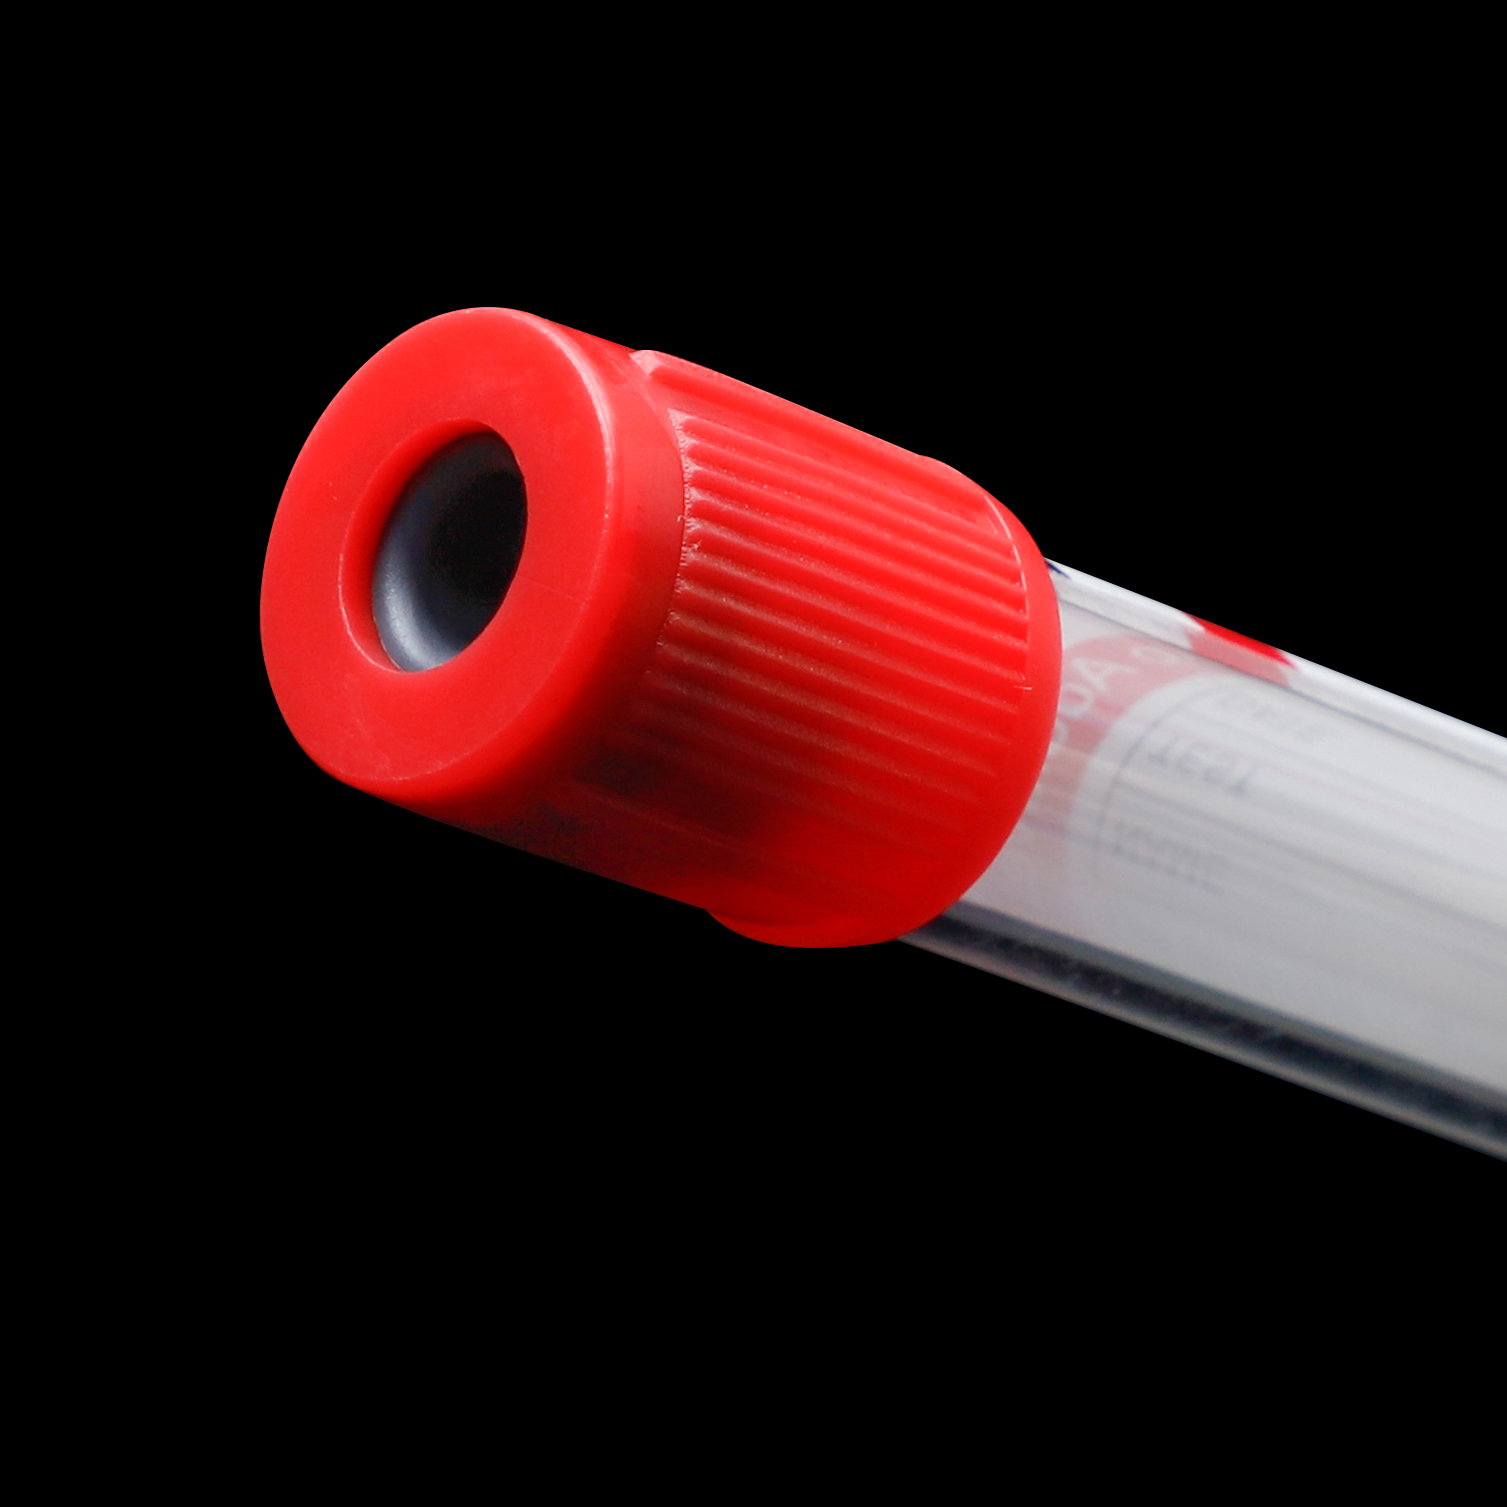 Vacuum Blood Collection Tube (No Additive Tube)